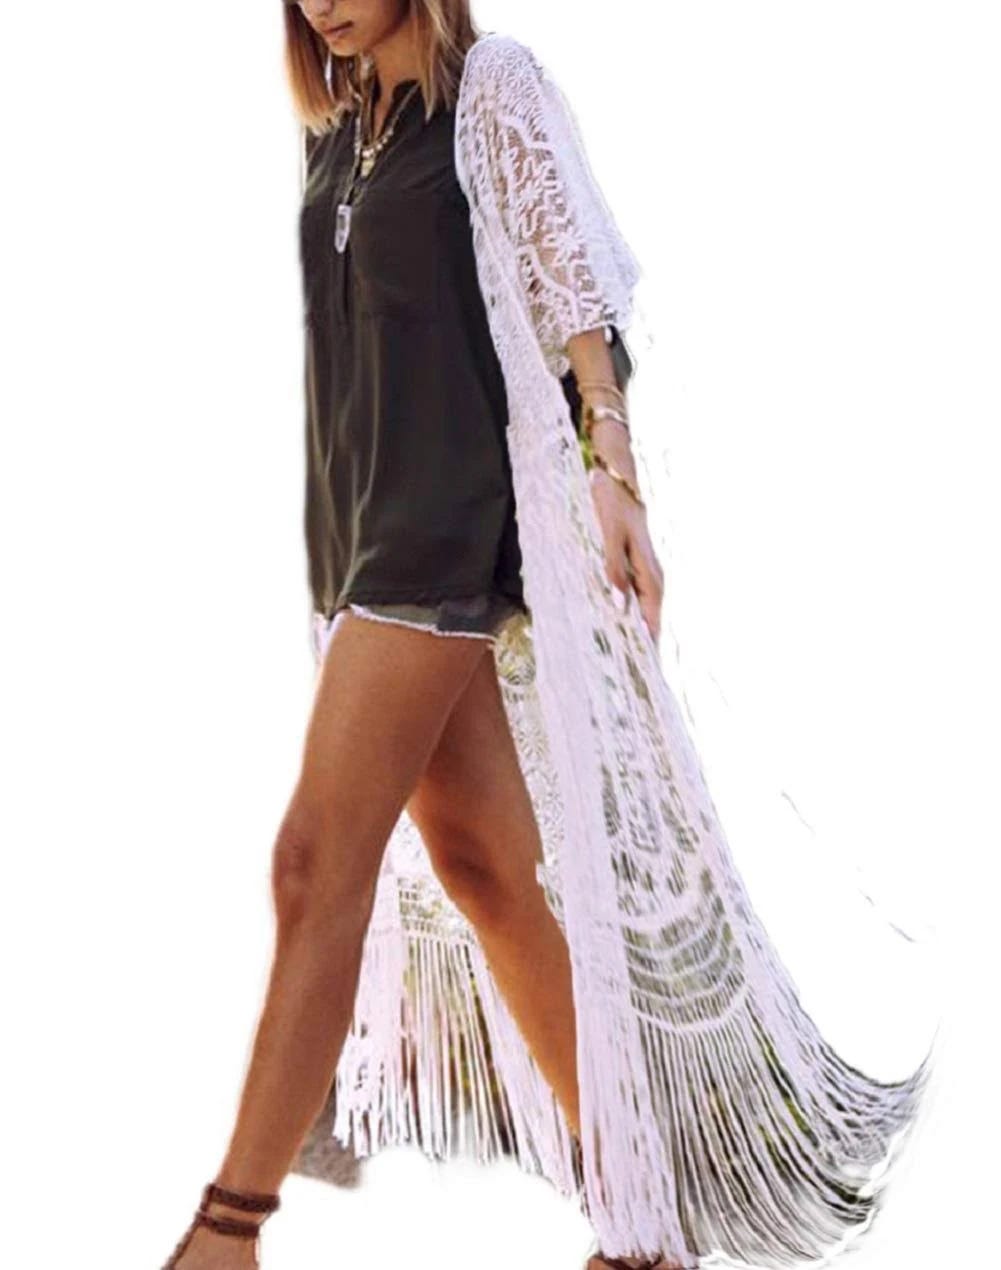 Bsubseach Sexy Lace Kimono Beach Cover Up | Image